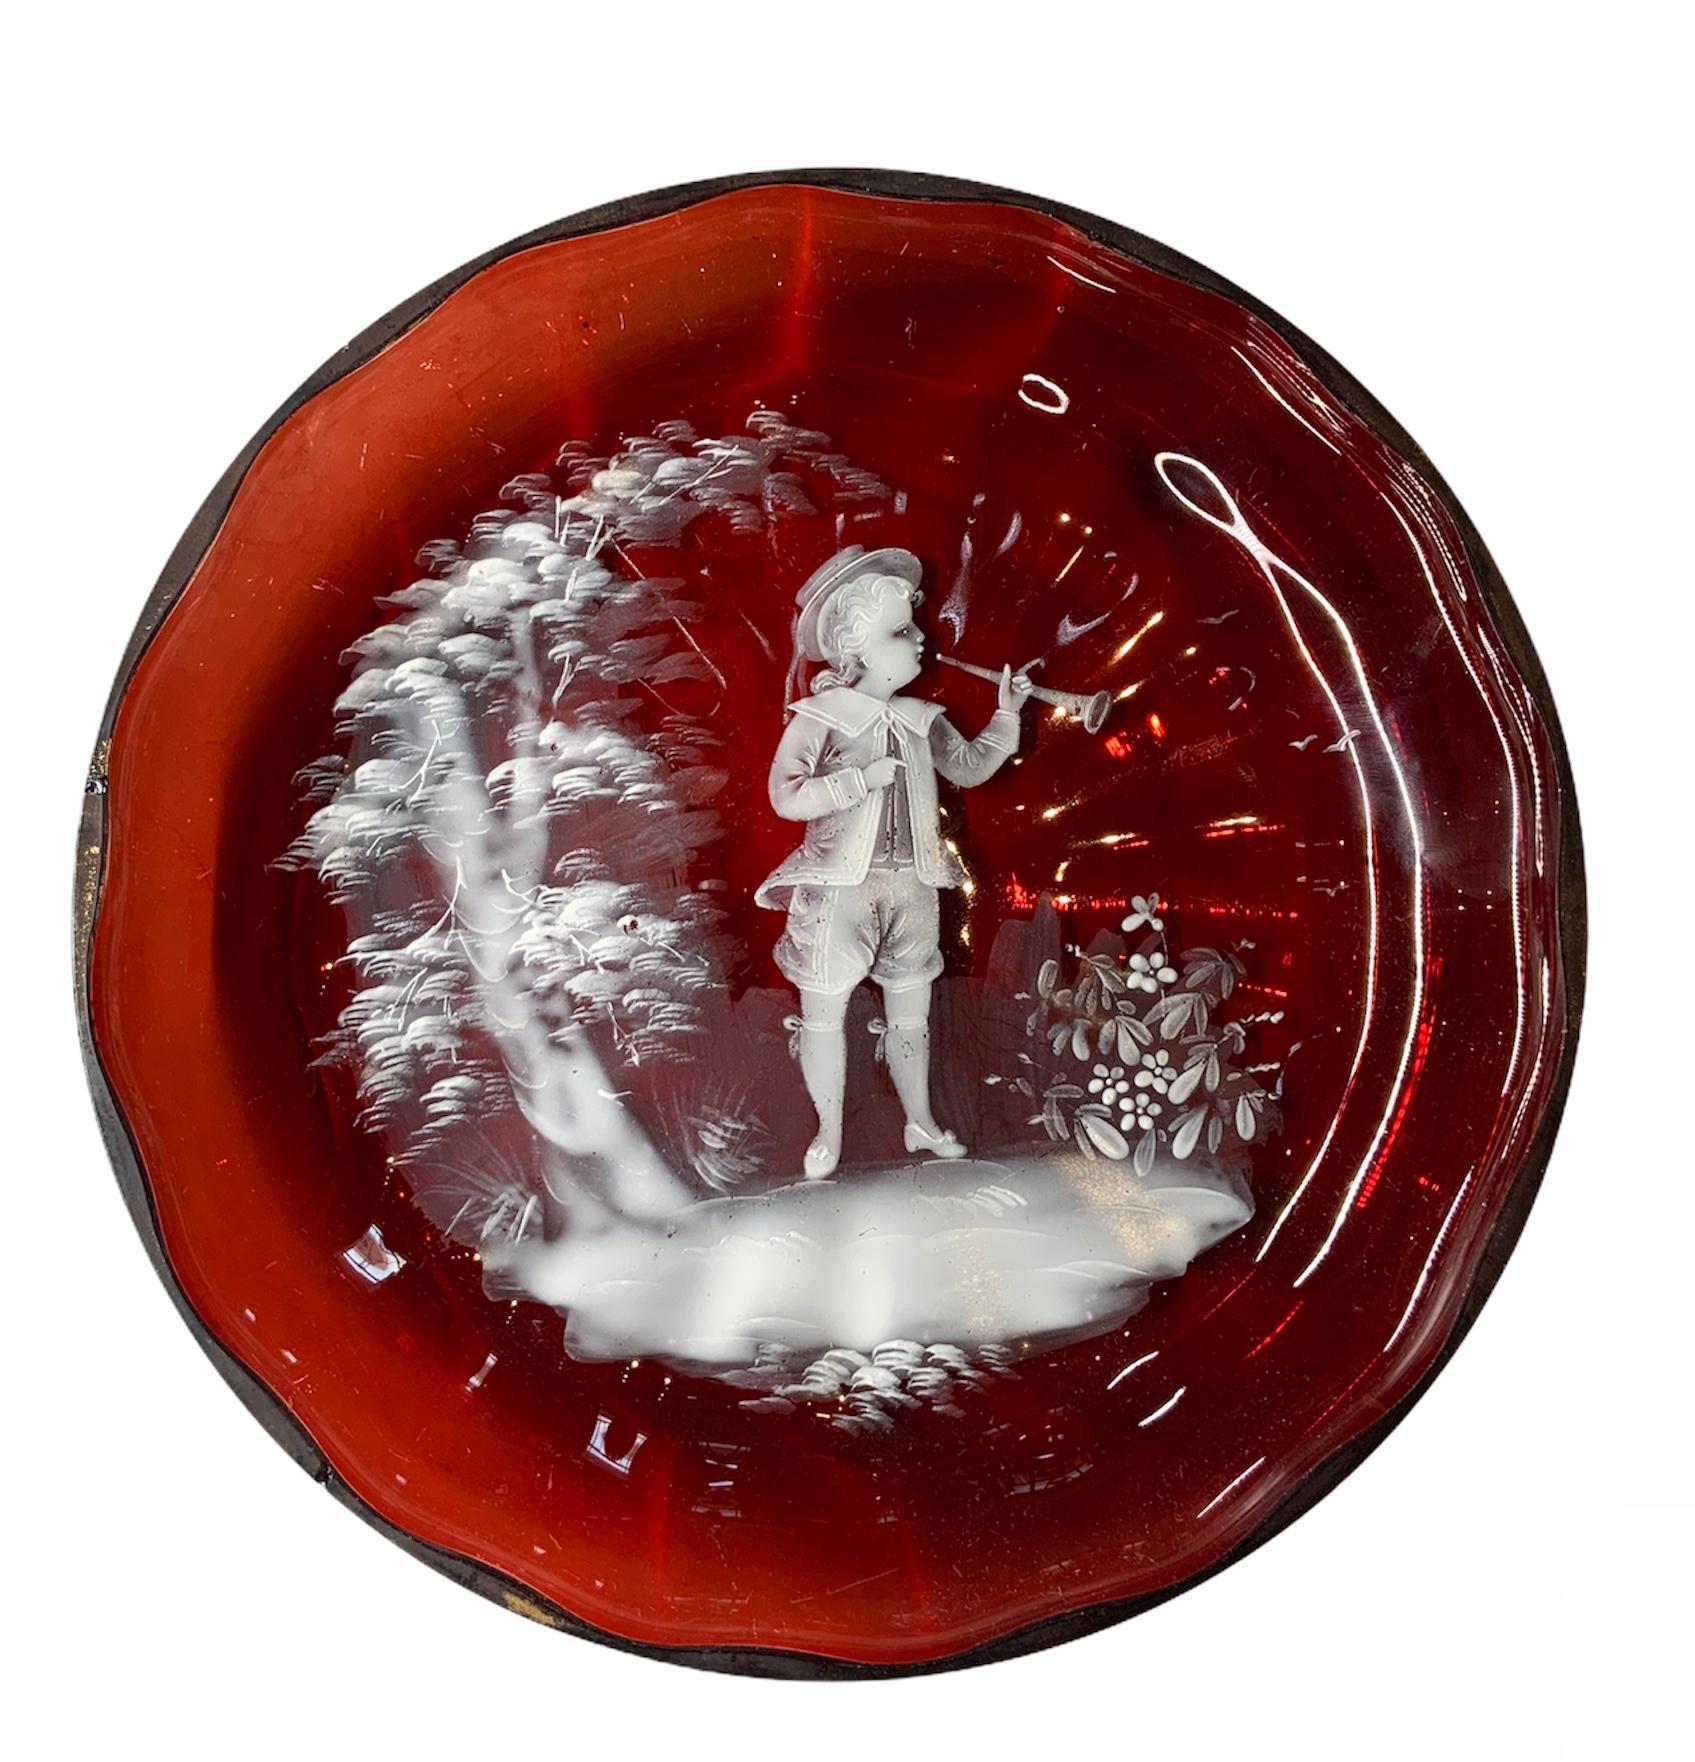 This a Mary Gregory ruby red white enameled glass featuring a scene of a Victorian era boy playing a trumpet in a landscape adorned with a small tree and some flowers.